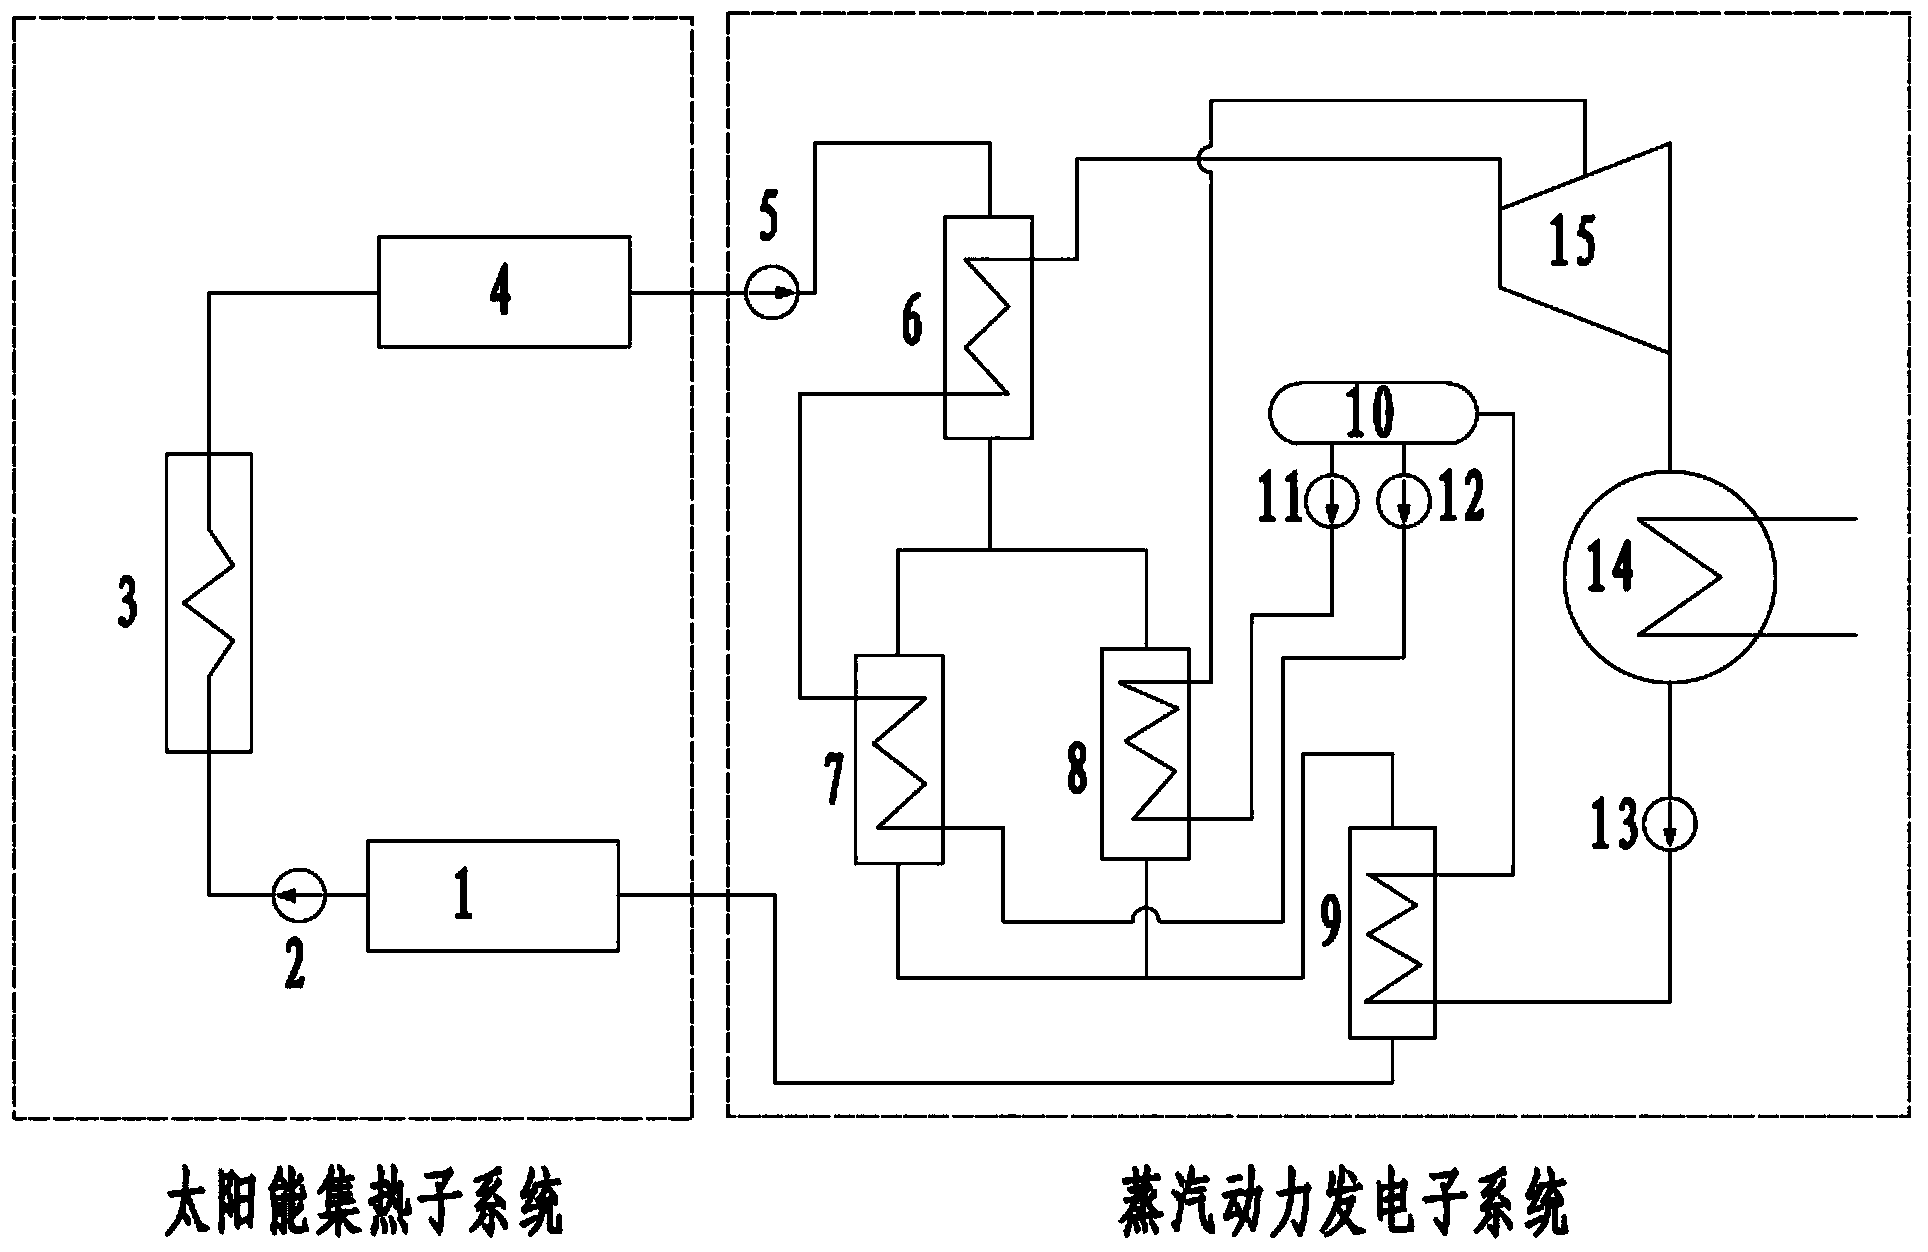 Two-loop type solar thermal power generation system